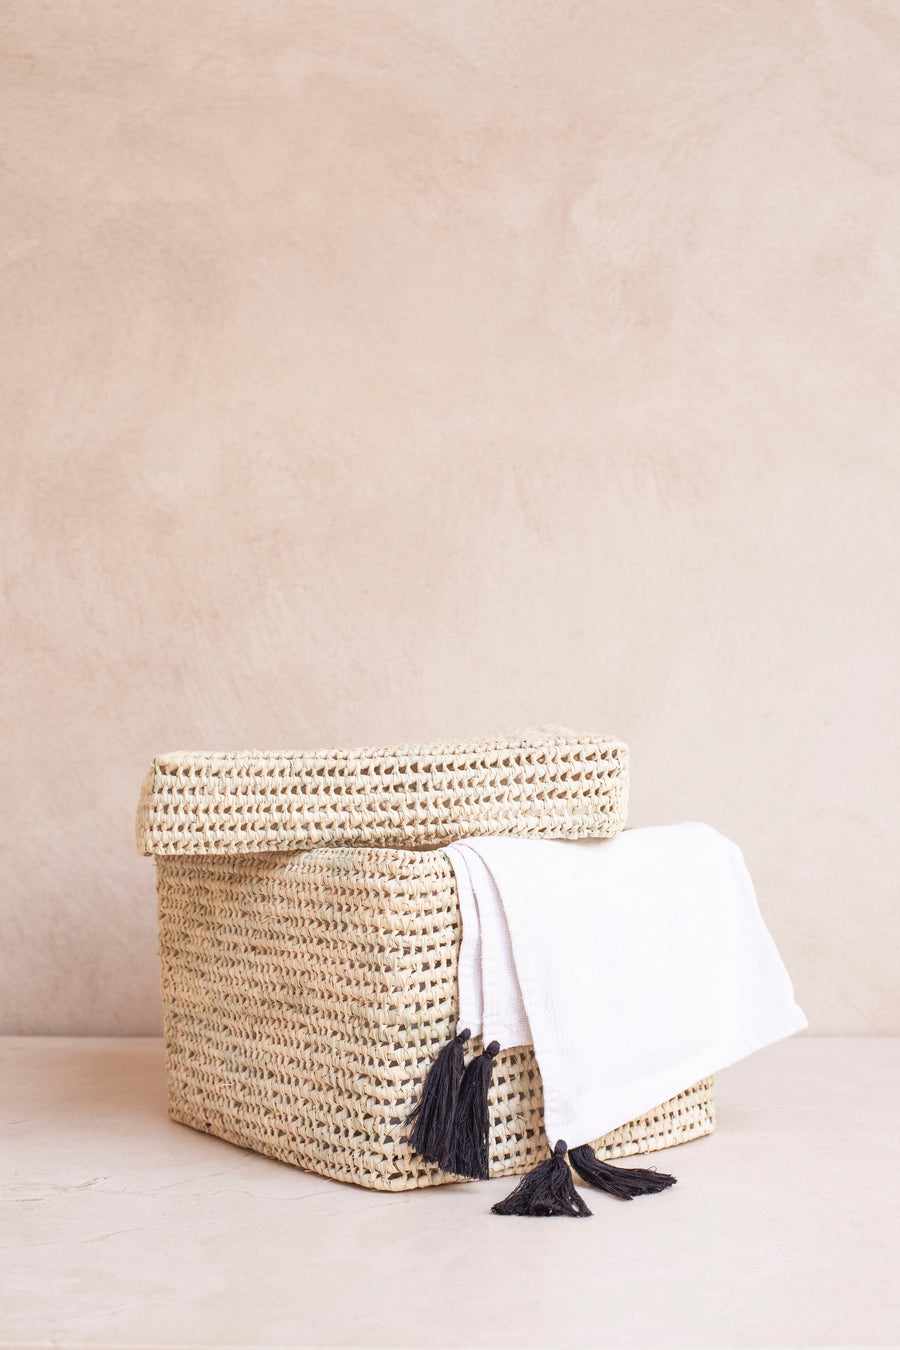 Palm Basket with Lid Square